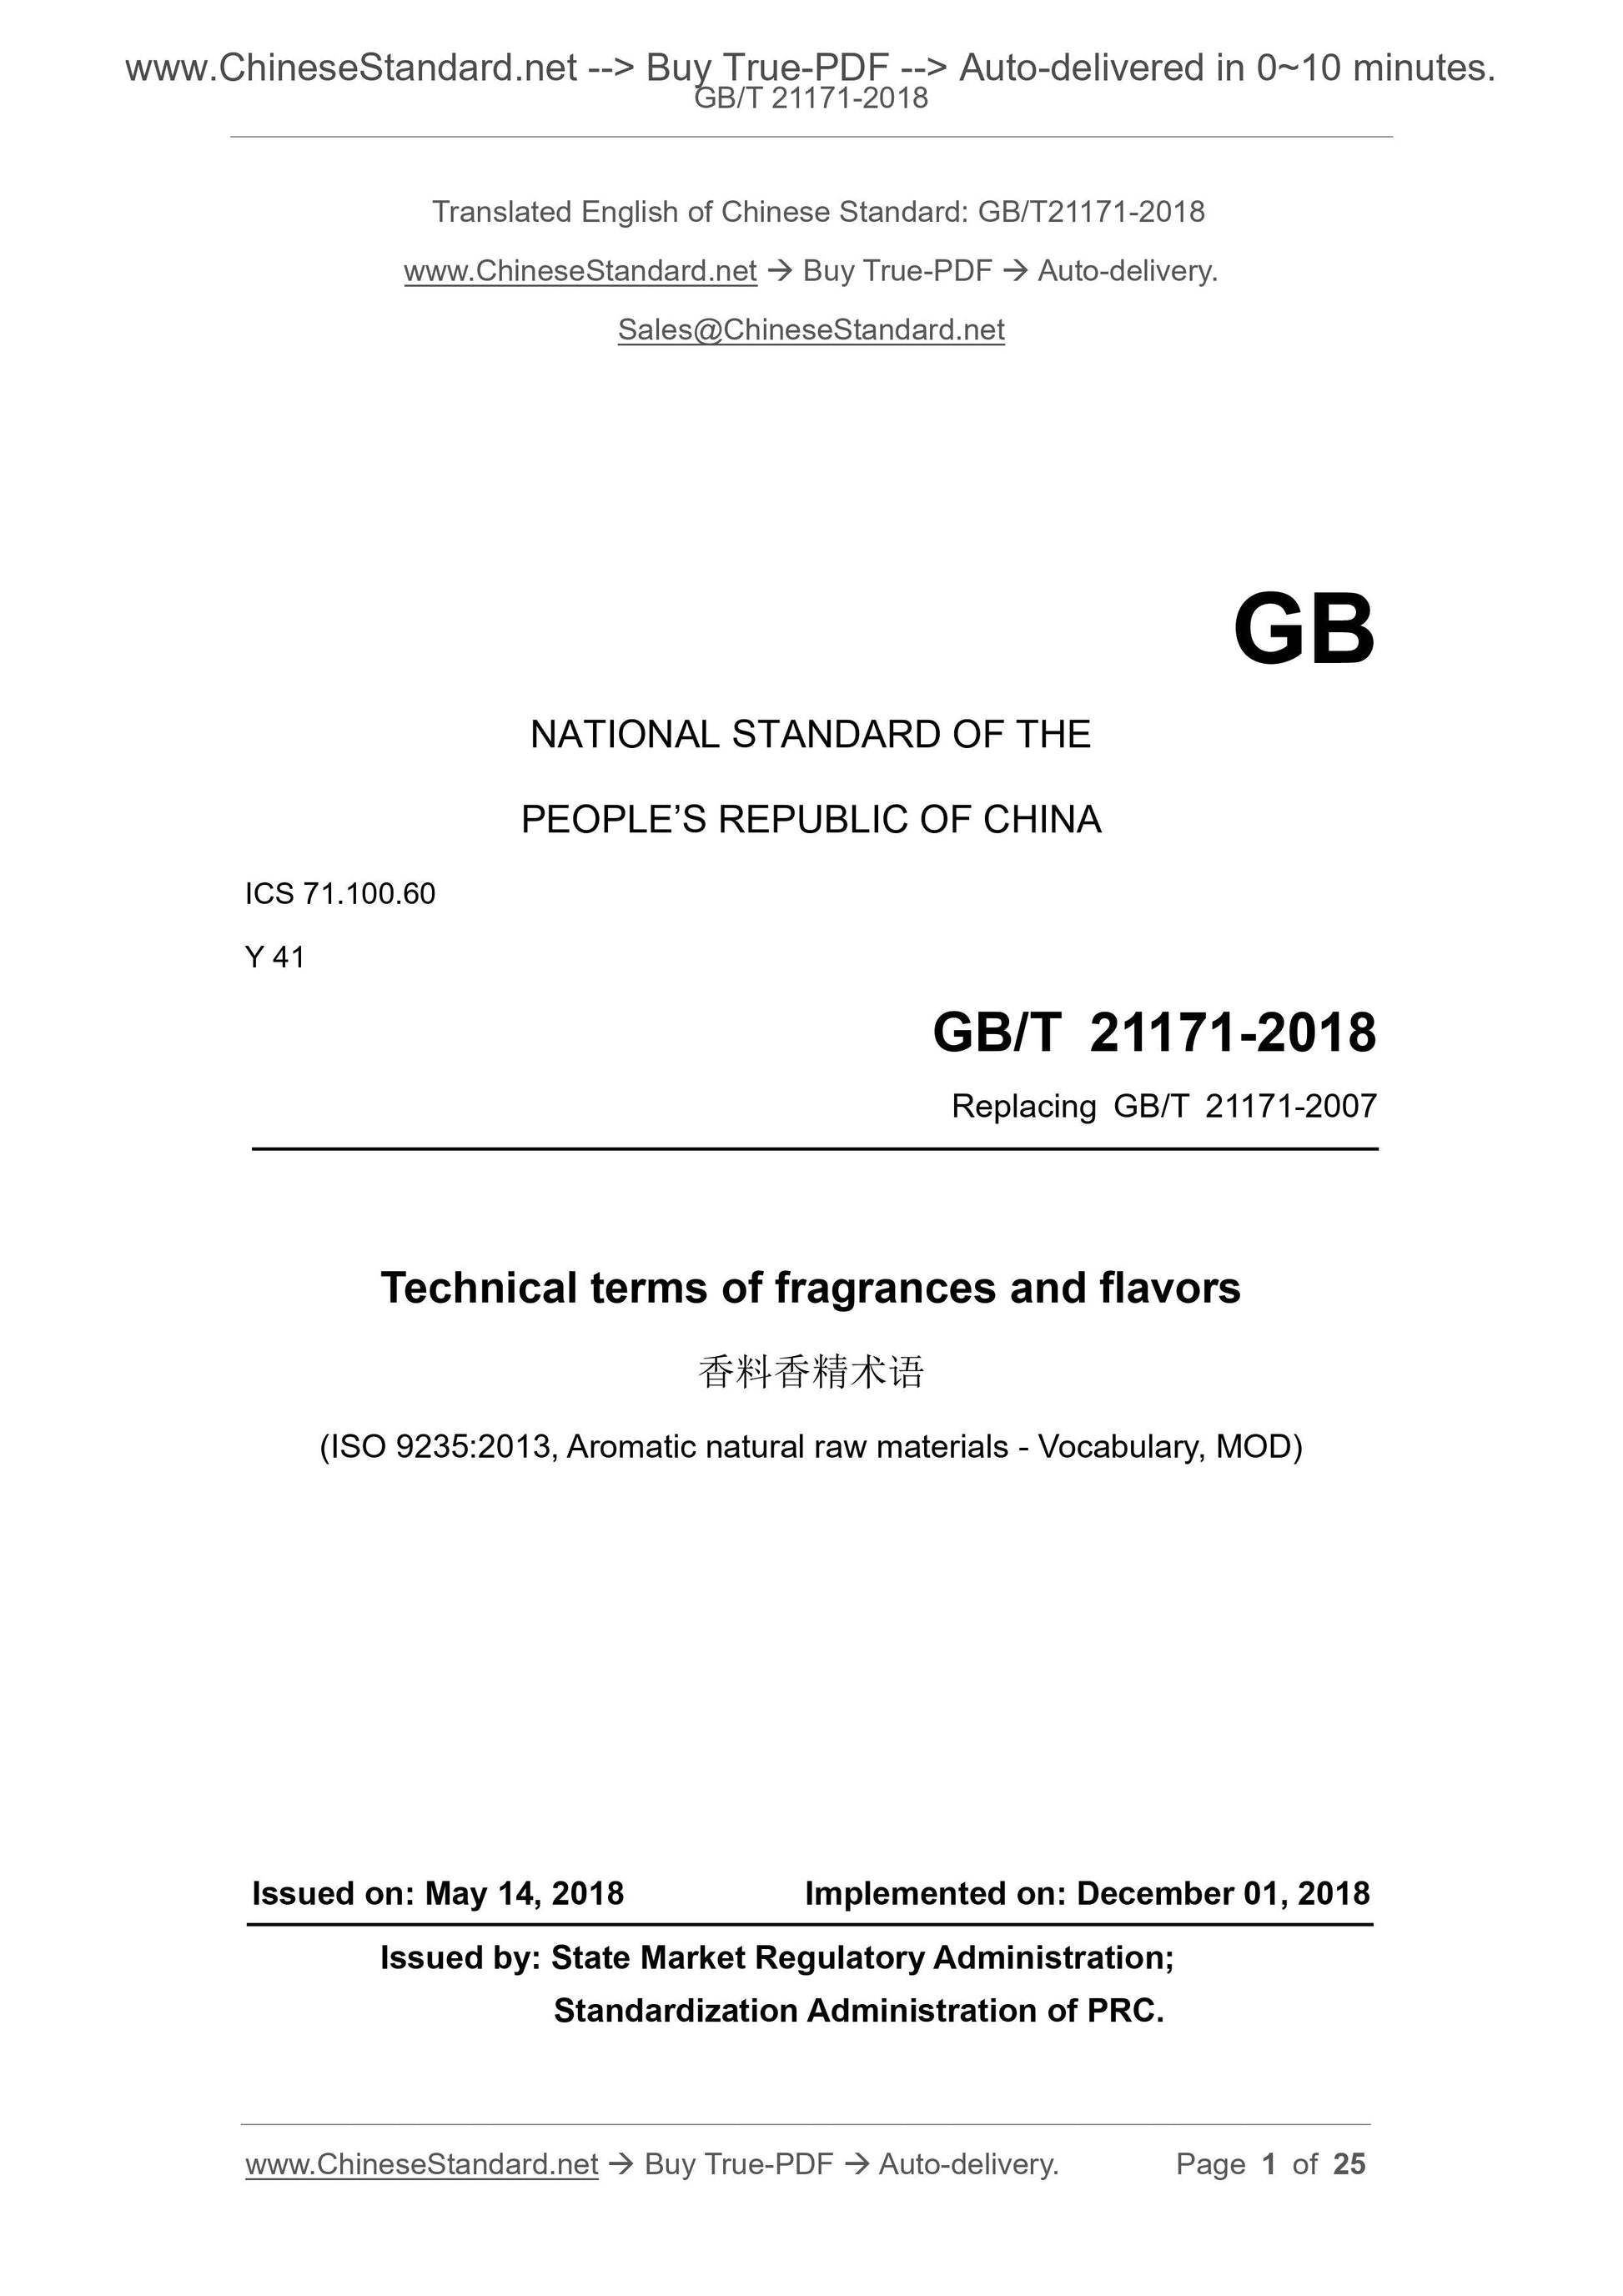 GB/T 21171-2018 Page 1